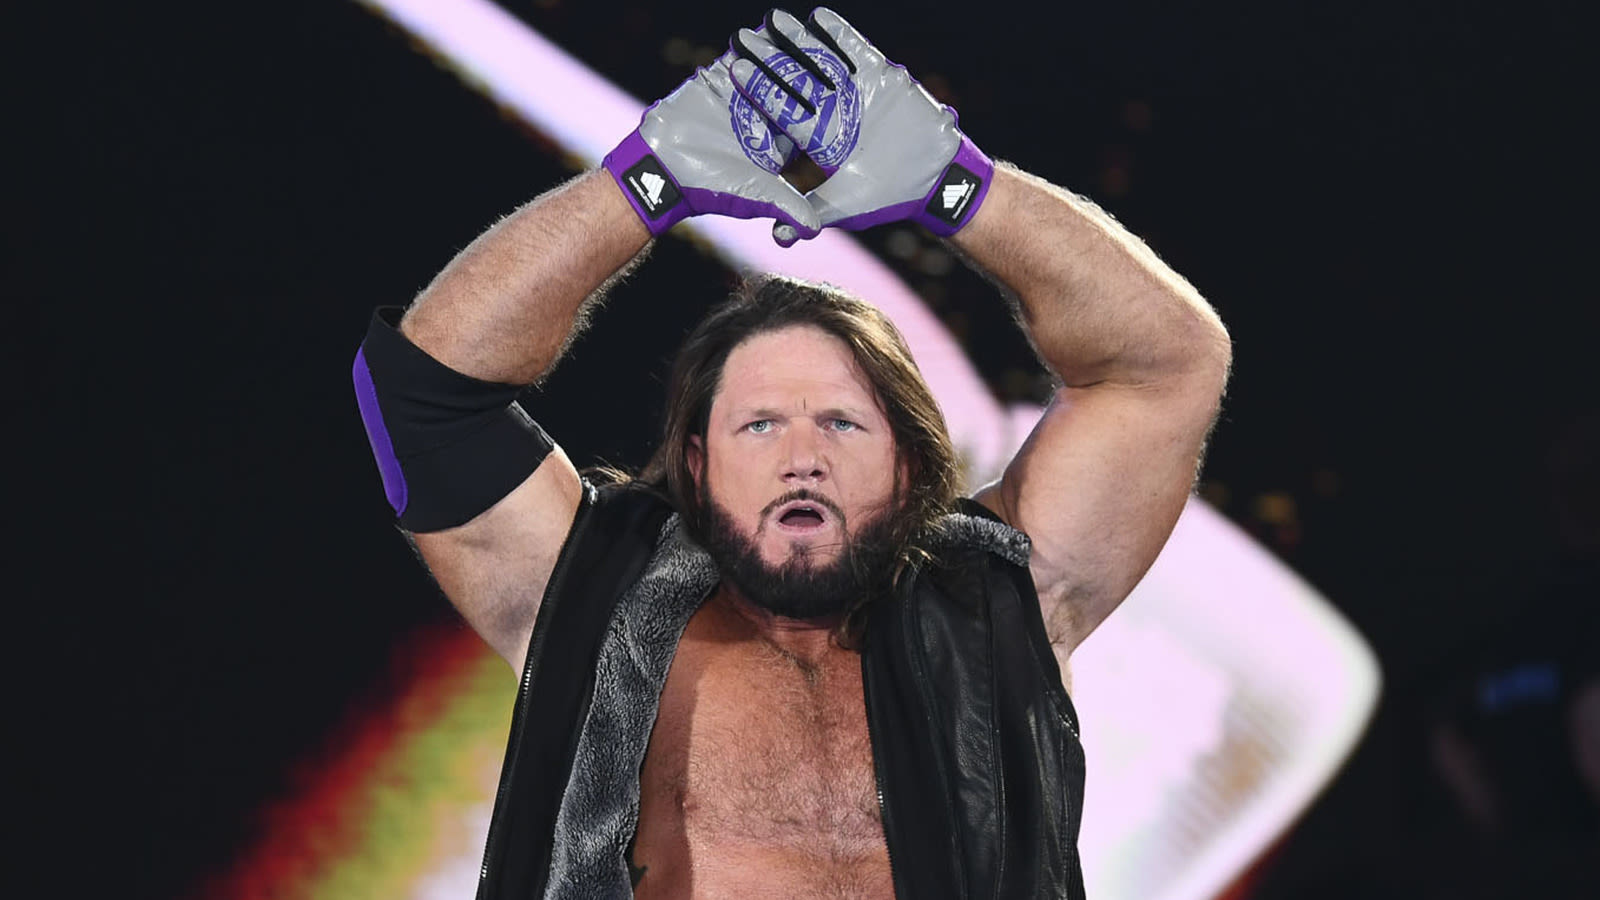 WWE Star AJ Styles Wants A Match Against The Rock, But There's A Catch - Wrestling Inc.